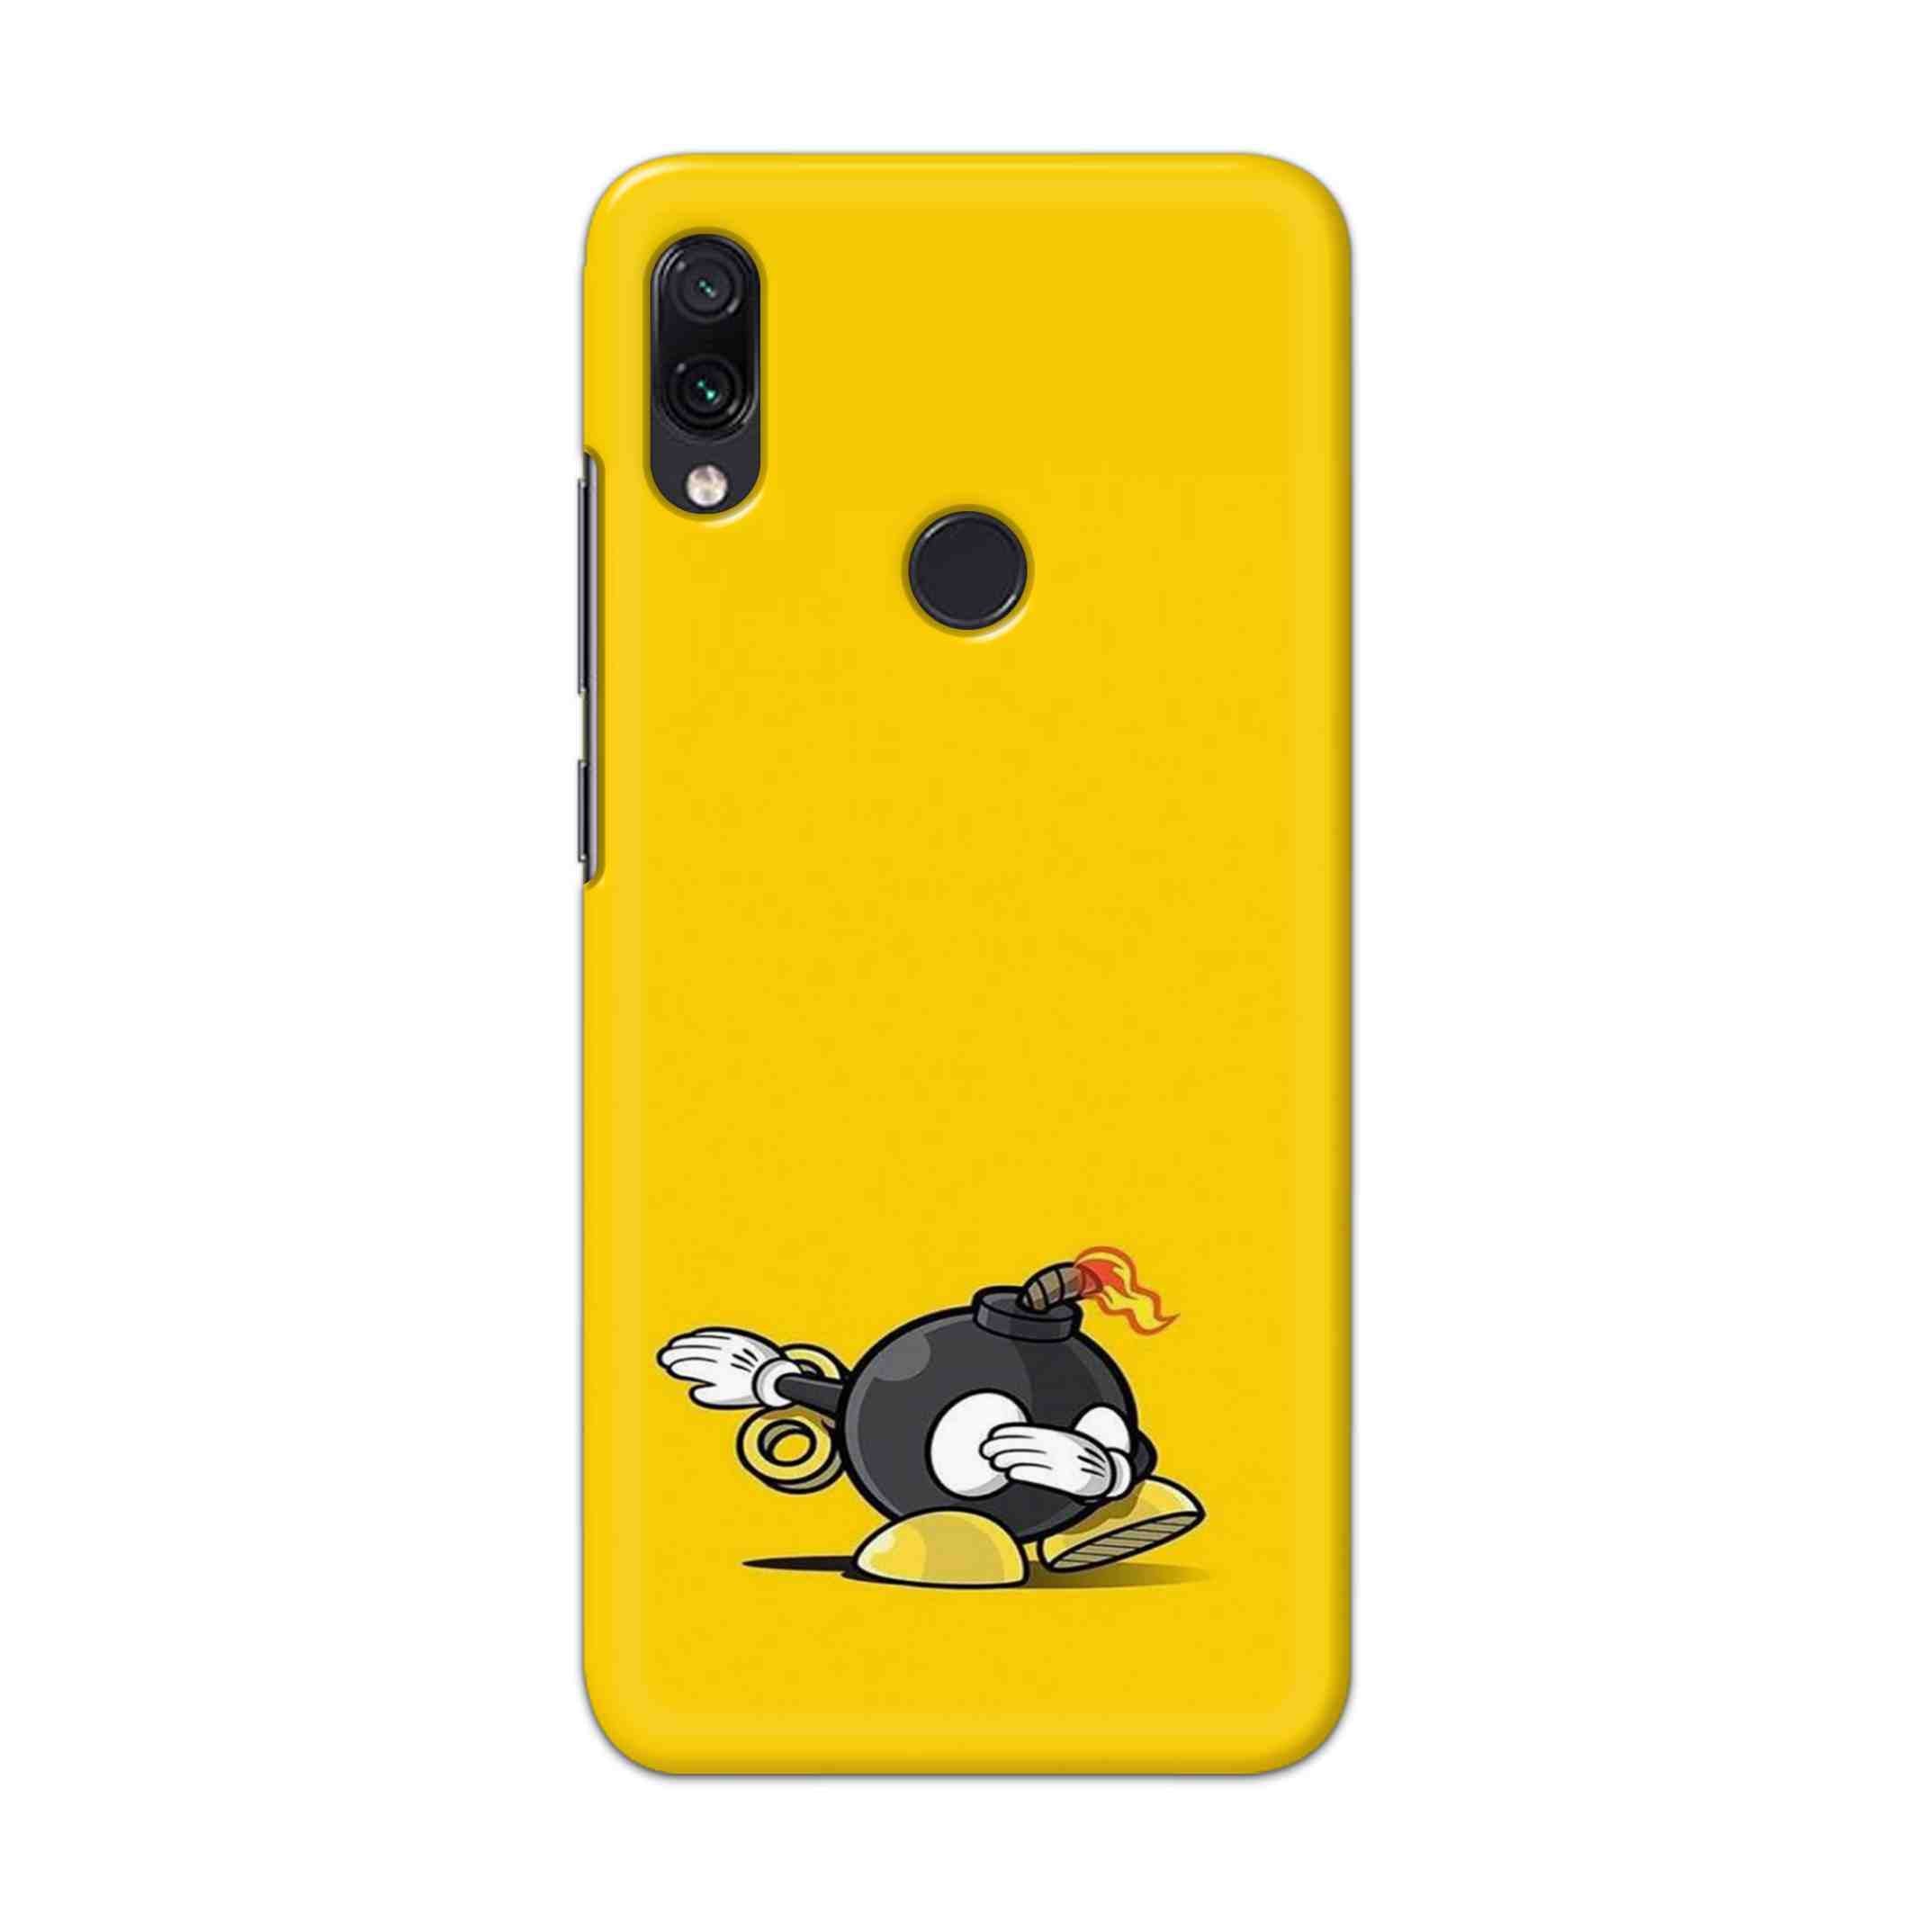 Buy Dashing Bomb Hard Back Mobile Phone Case Cover For Xiaomi Redmi 7 Online